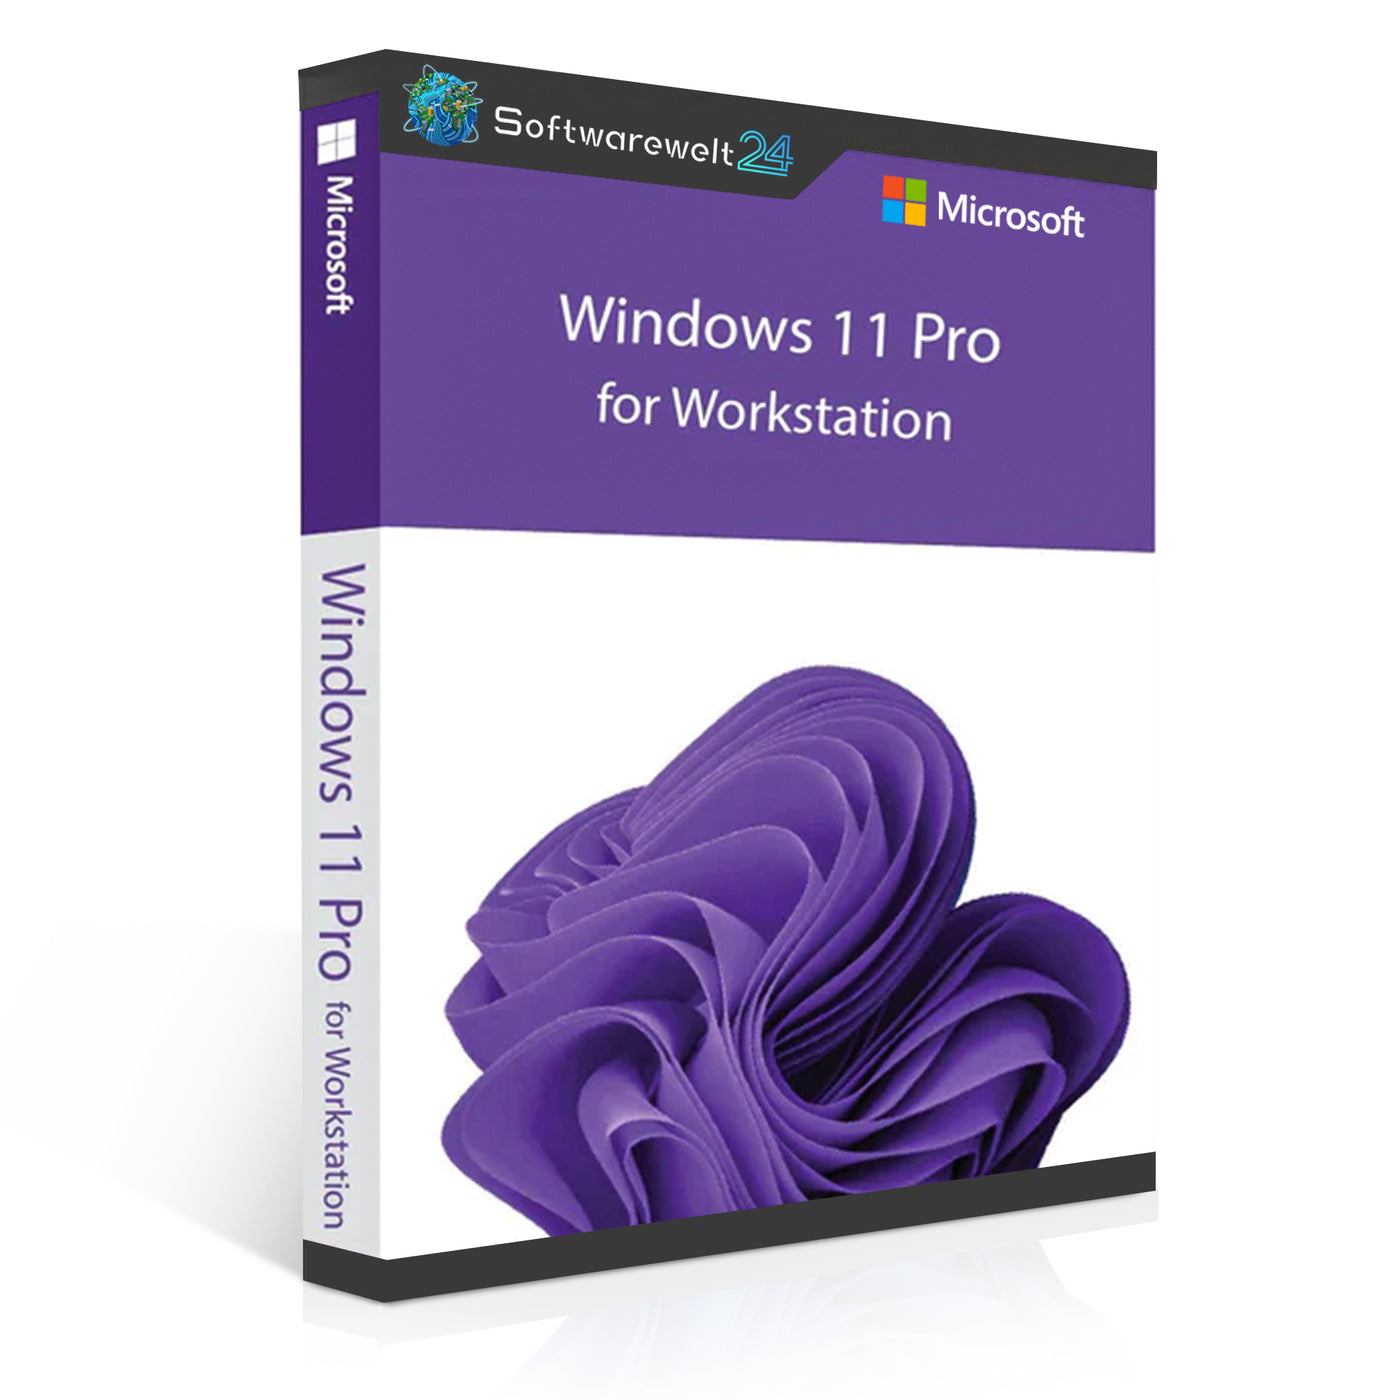 Windows 11 Pro for Workstation ESD